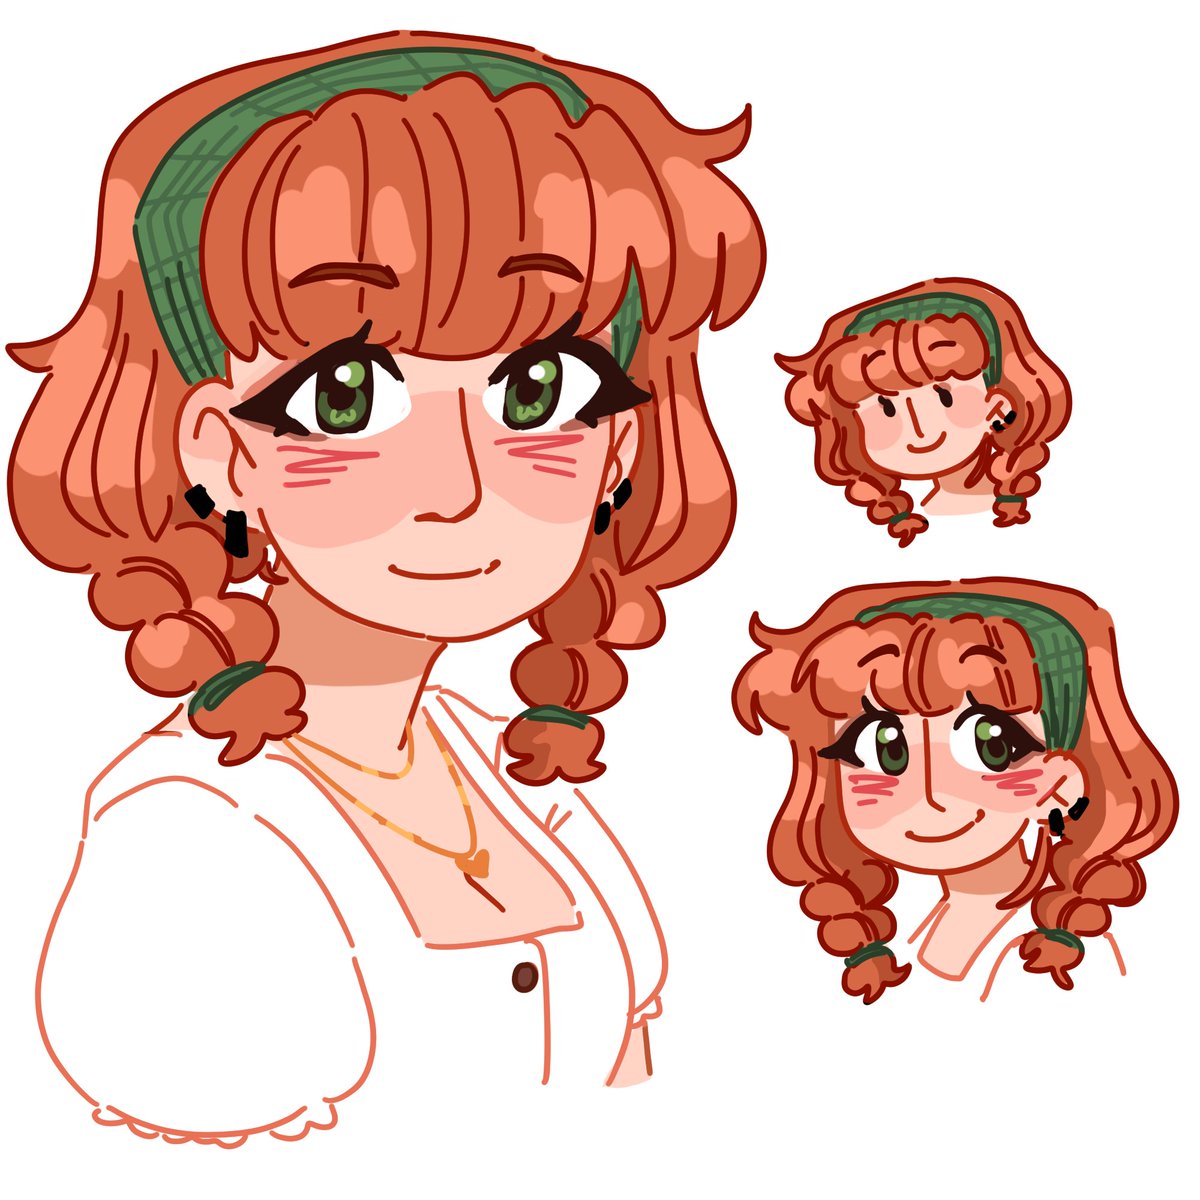 Ive been wanting to draw her for so long and i finally sat down and committed to it! I drew her and all my styles as practice 

[@soupforeloise #soupforeloise #minecraftsos ]